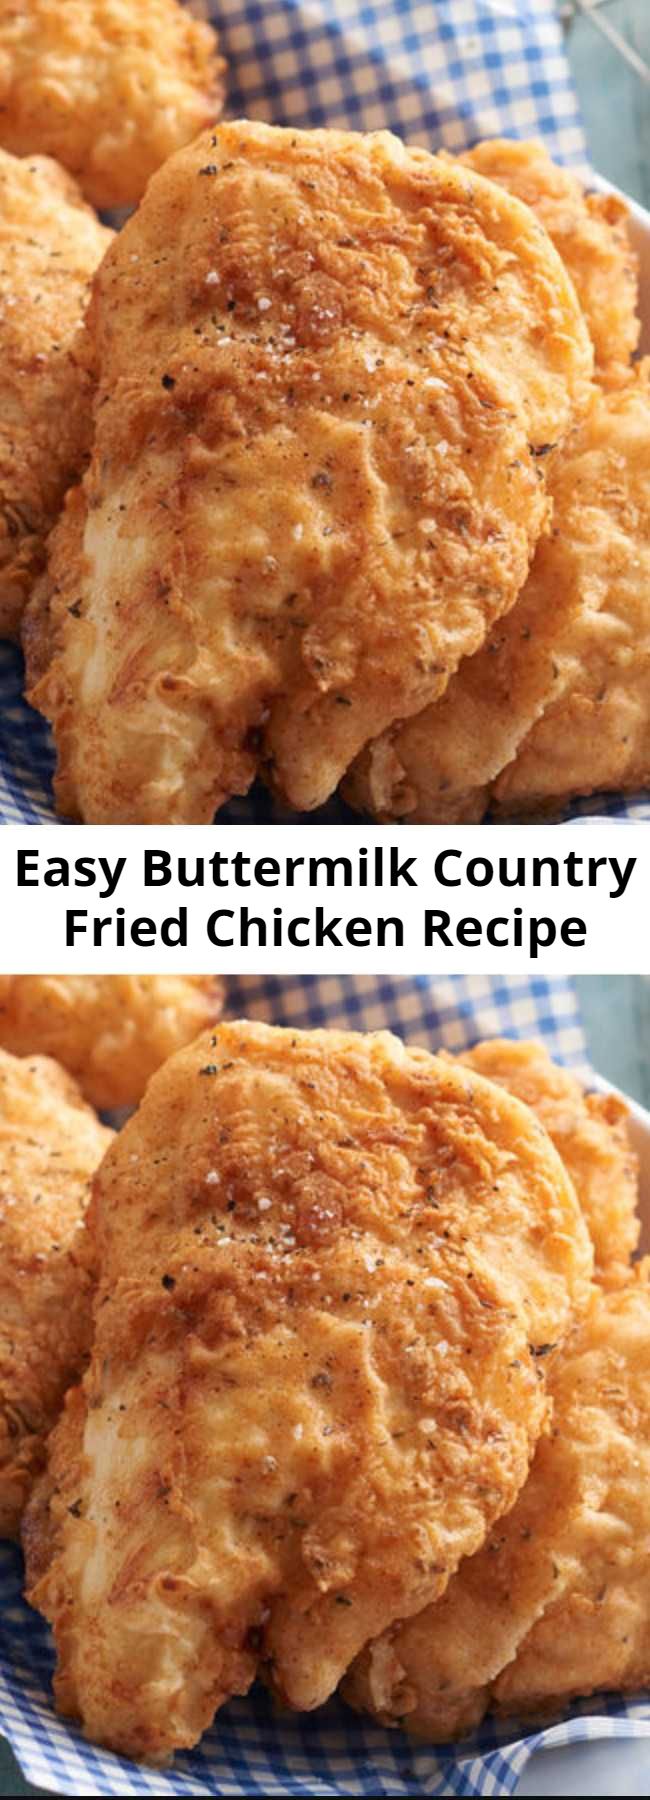 Easy Buttermilk Country Fried Chicken Recipe - The secret to this juicy and tender fried chicken lies in the simple buttermilk marinade. The crisp crust has a delicious hint of thyme.